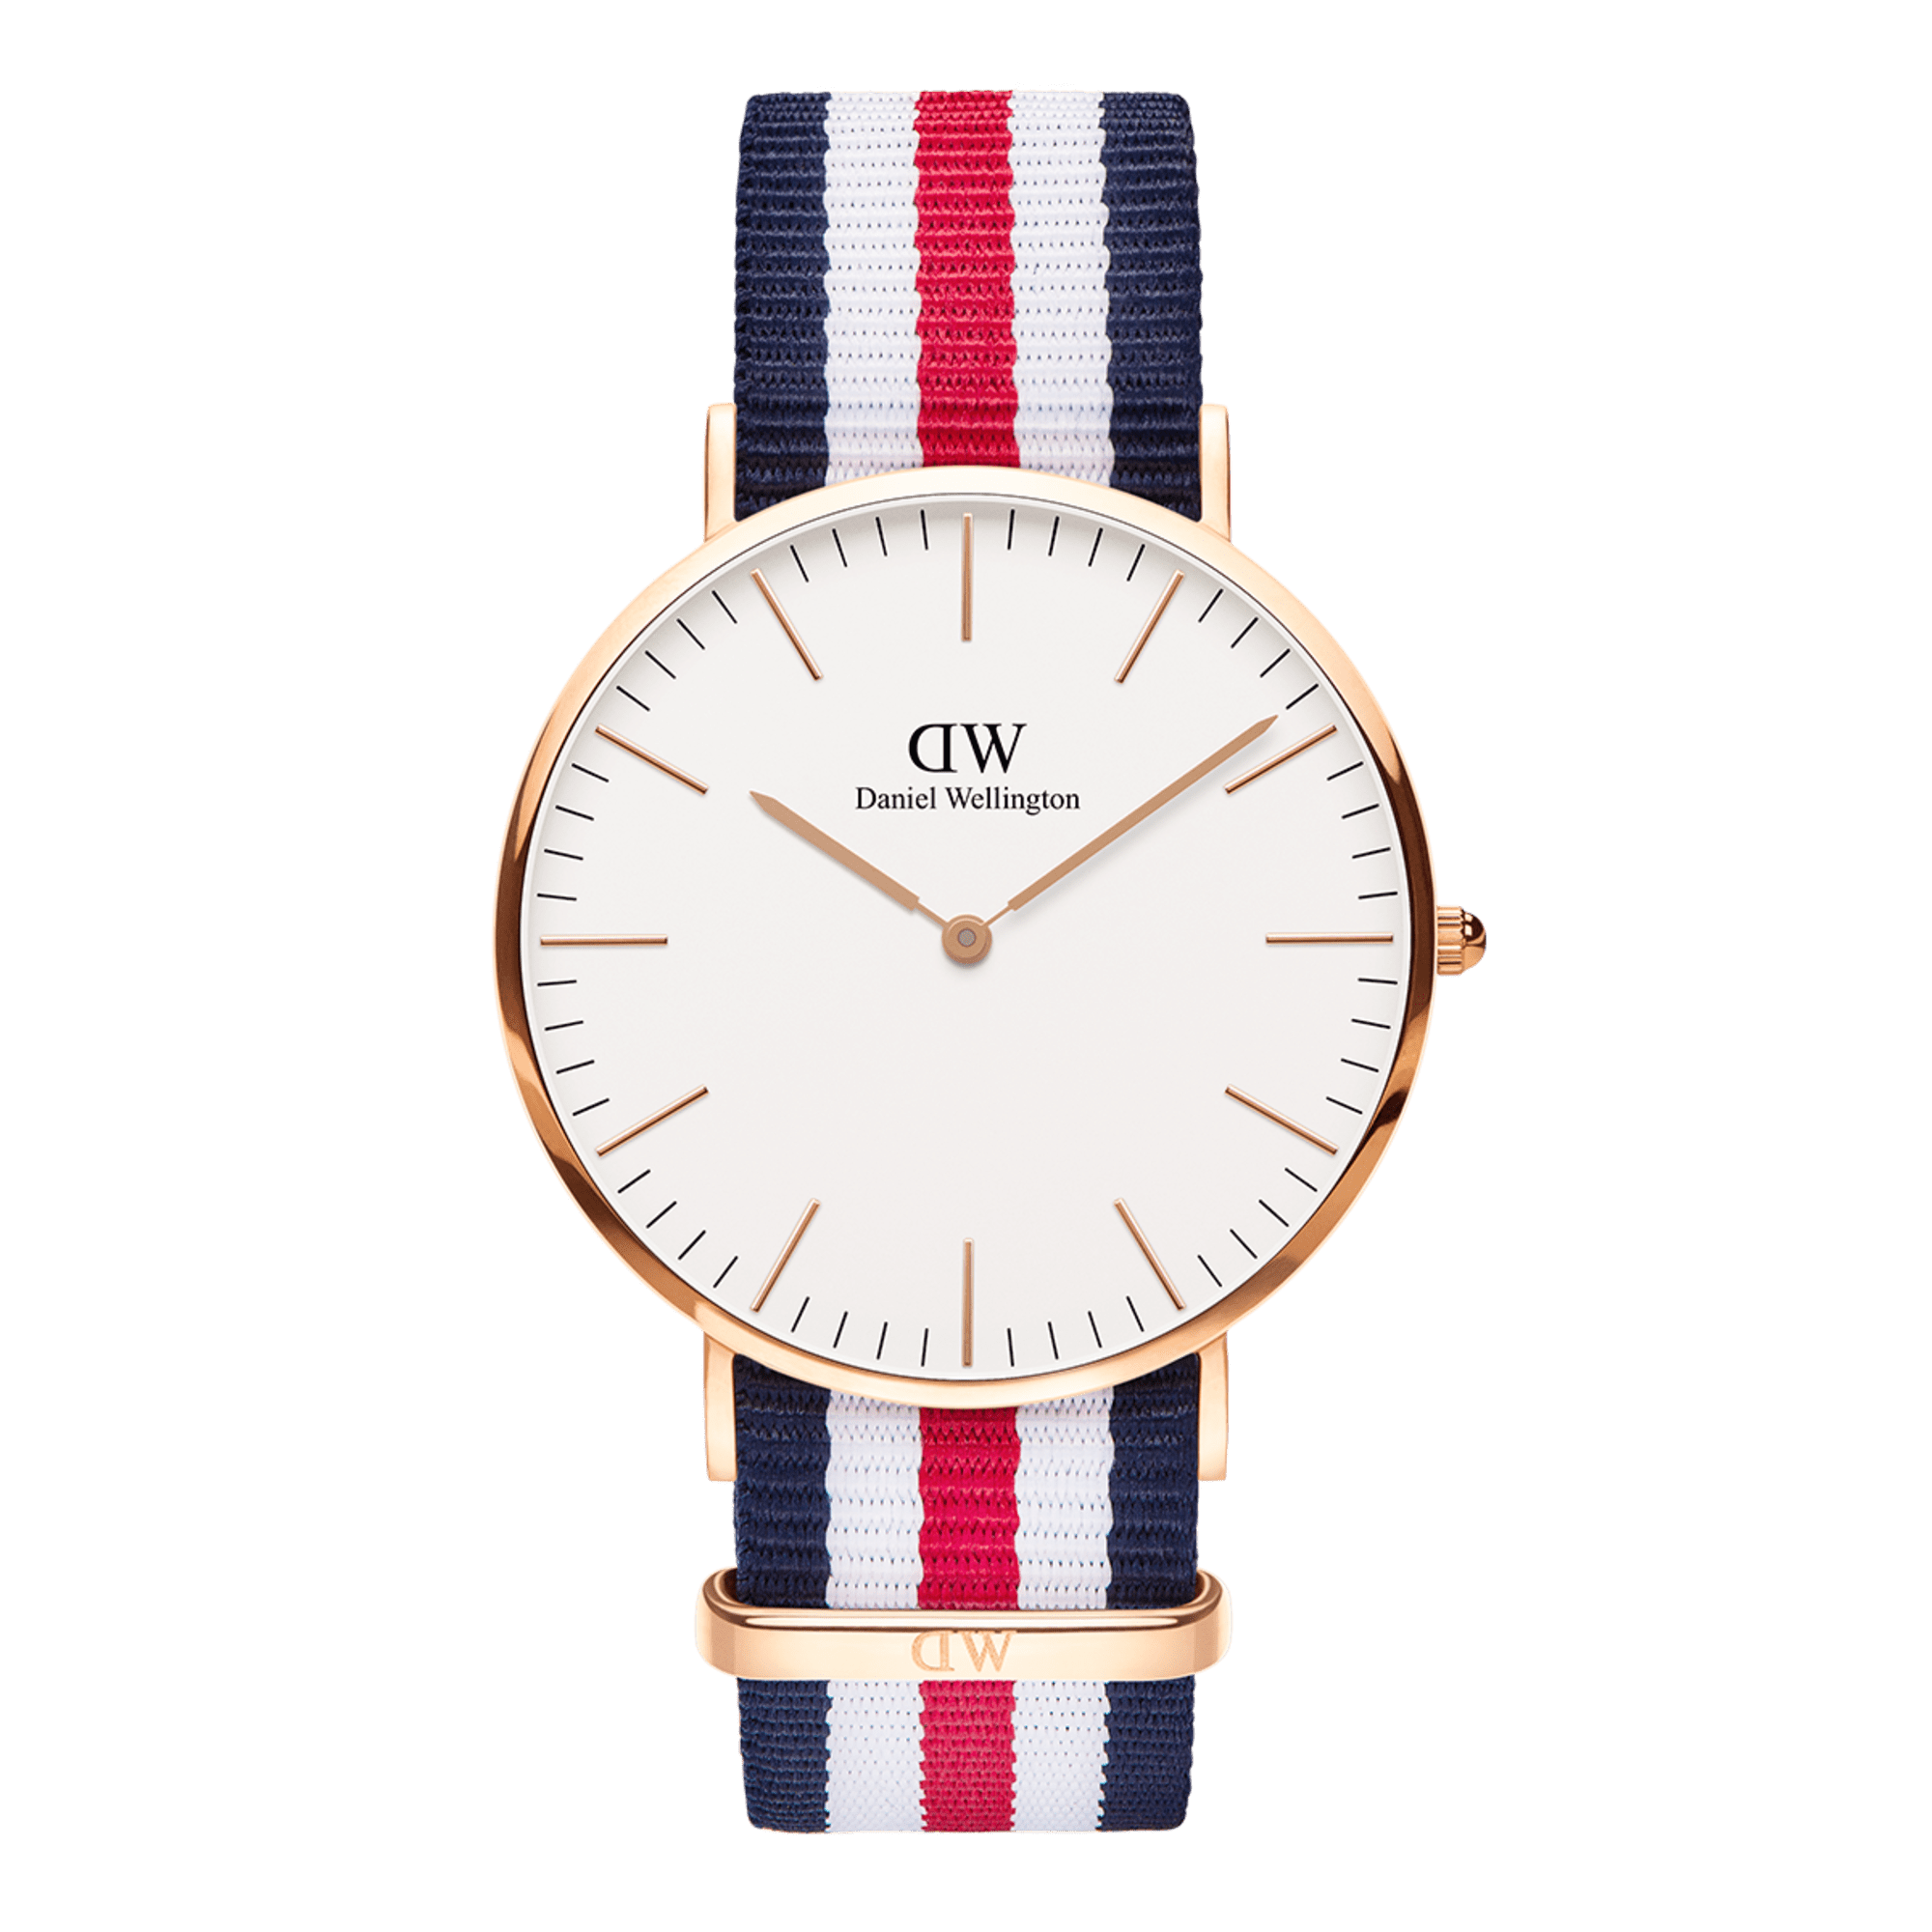 Canterbury - Men's rose gold watch with NATO strap | DW – Daniel